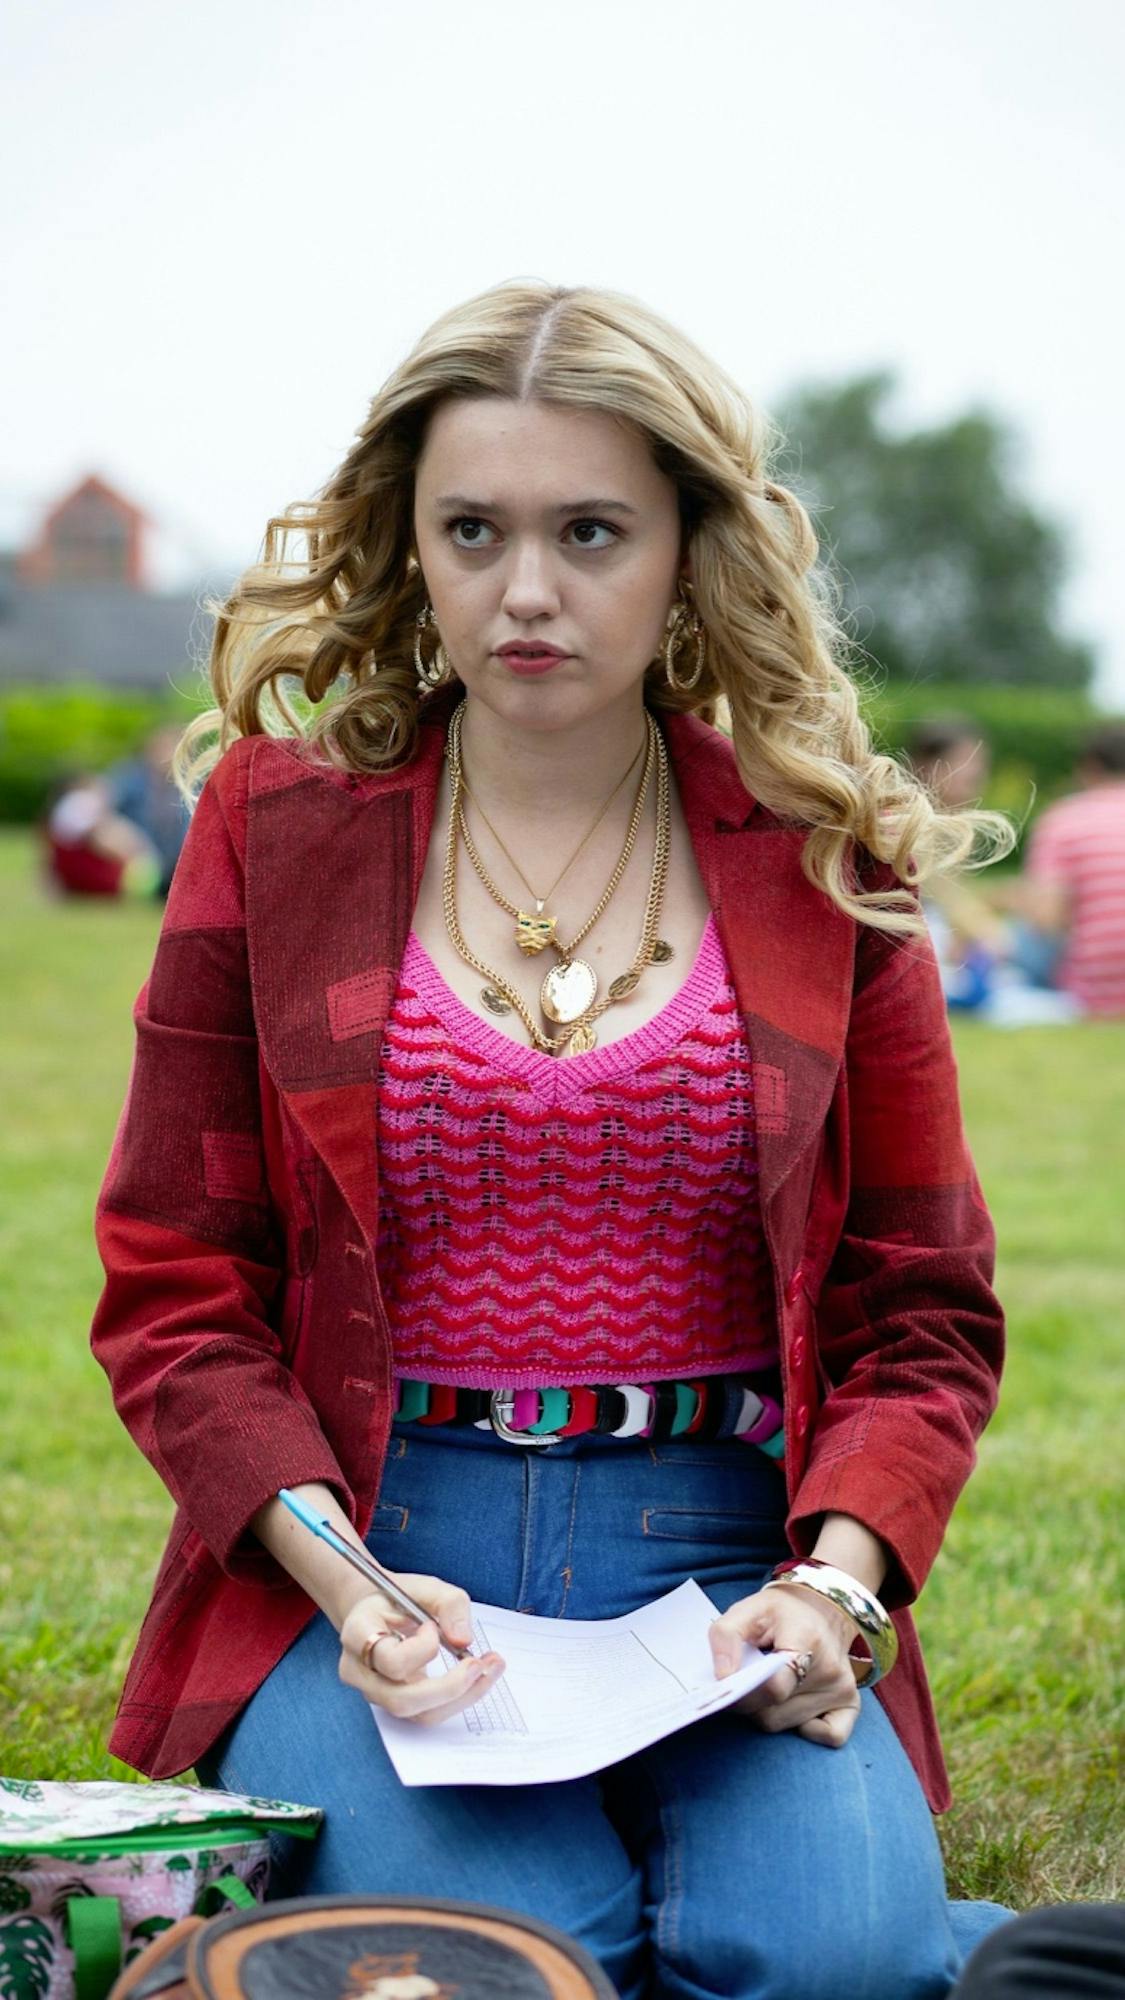 Aimee Gibbs (Aimee Lou Wood) wears a pink sweater, red coat, blue jeans, and a colorful belt. She kneels in the grass writing something on a piece of paper.